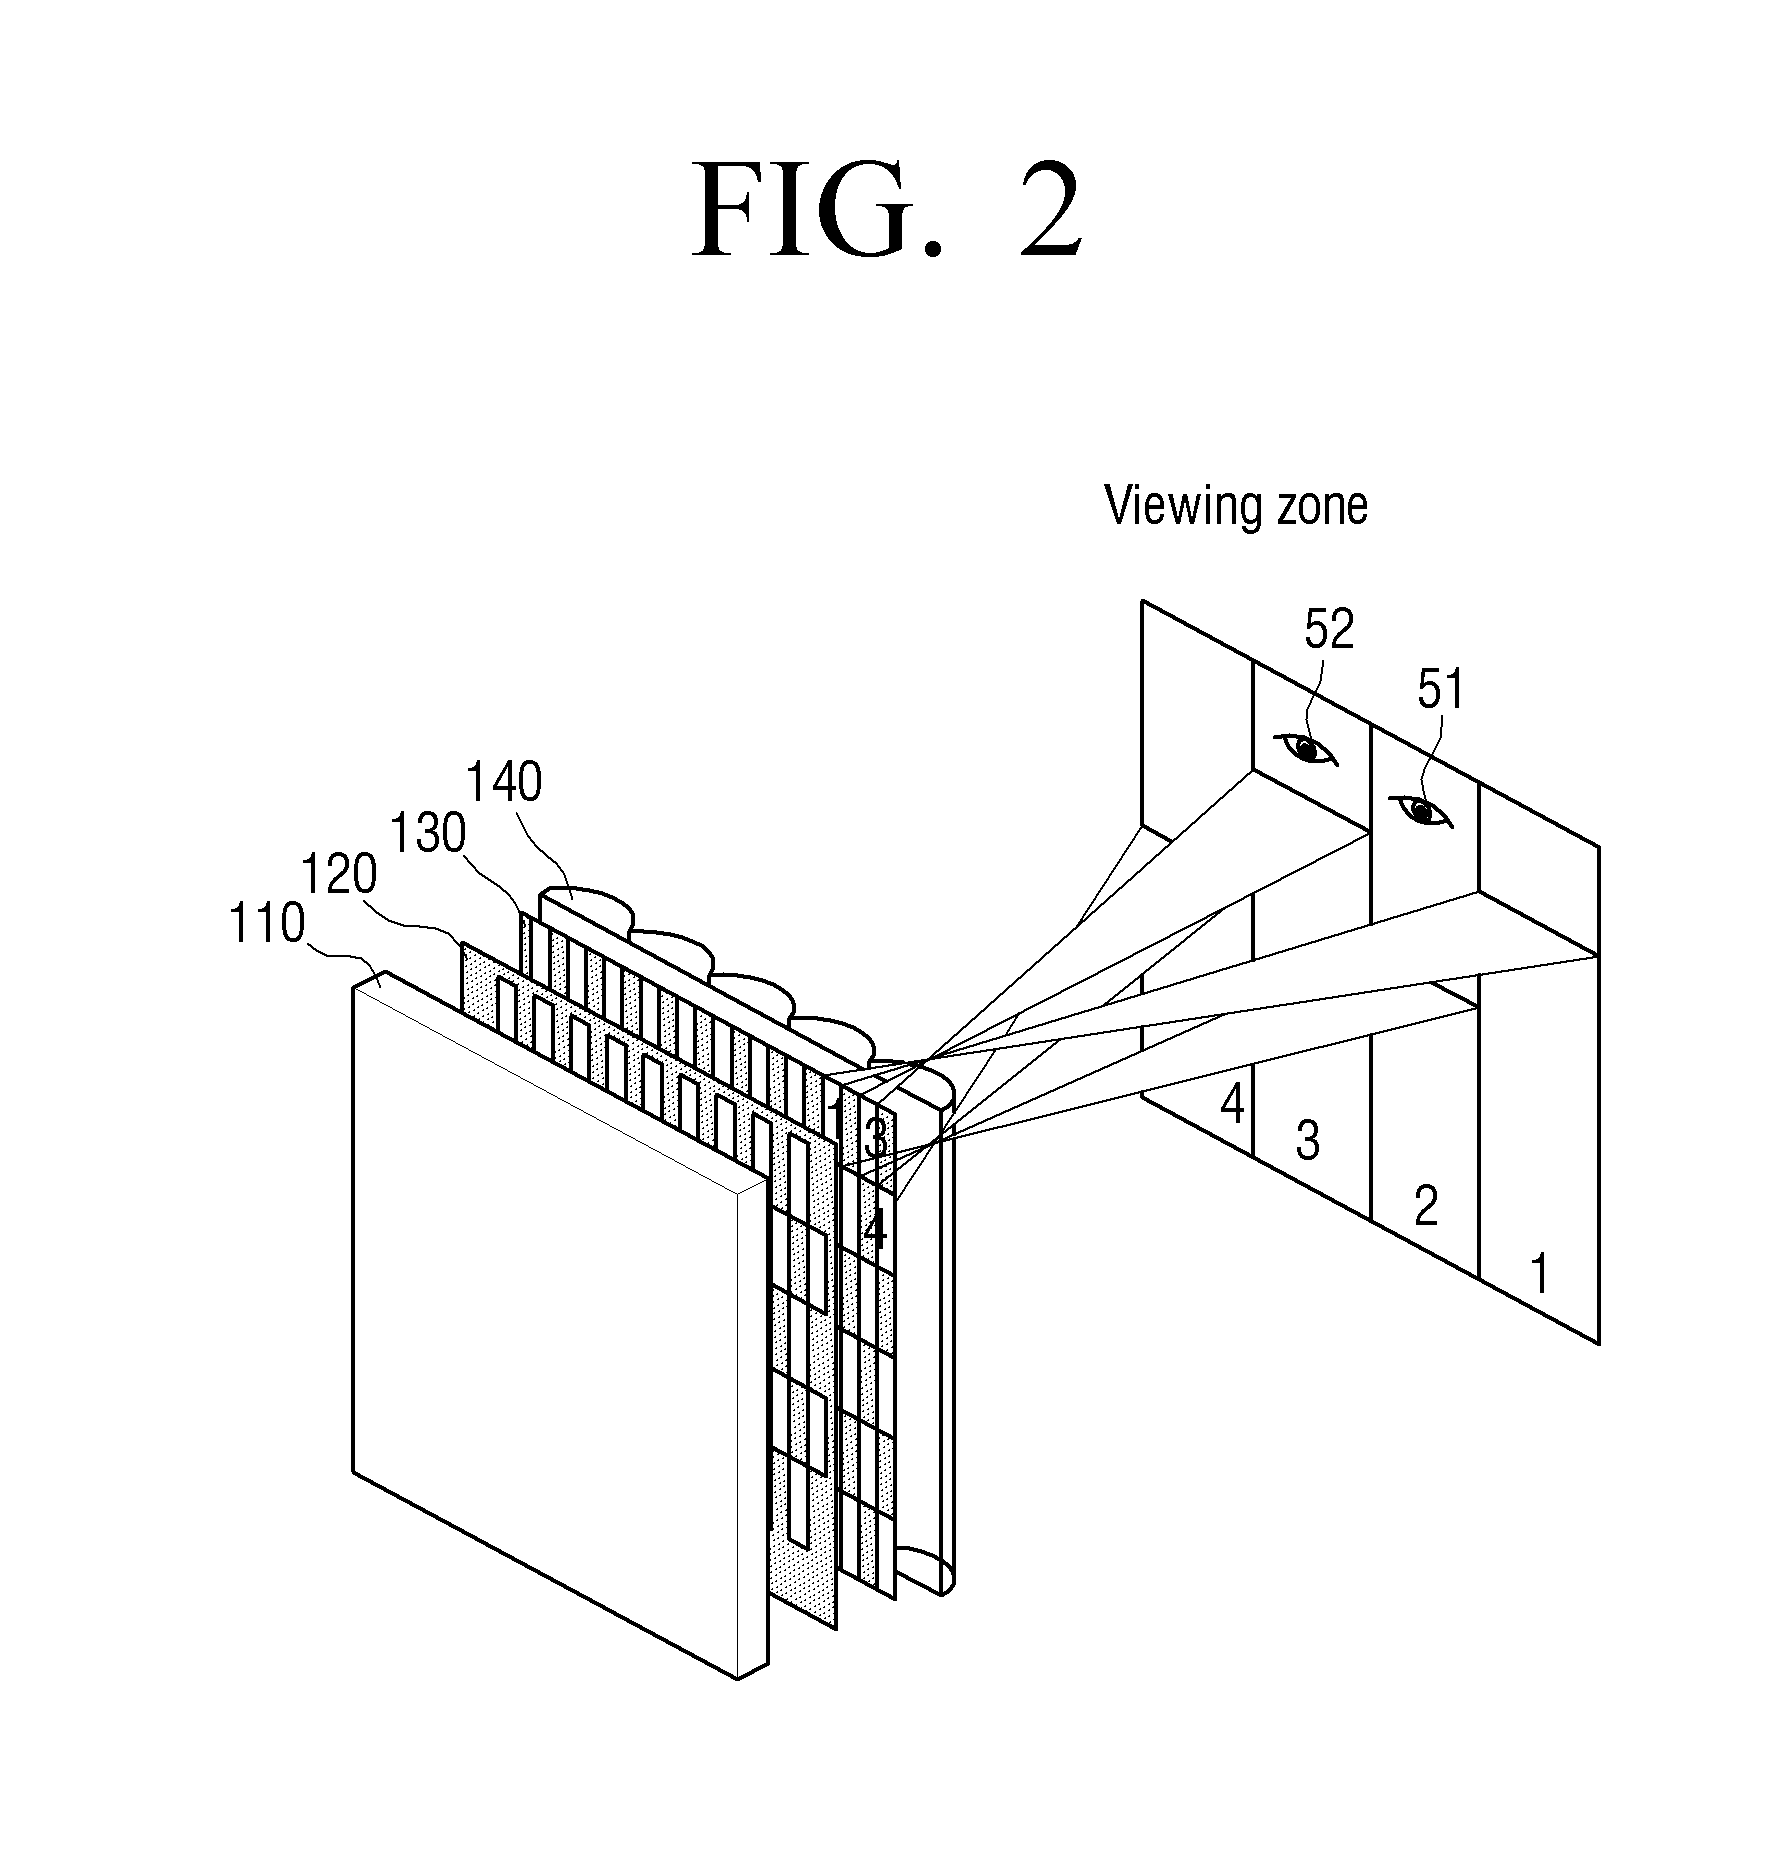 Multiple viewpoint image display device